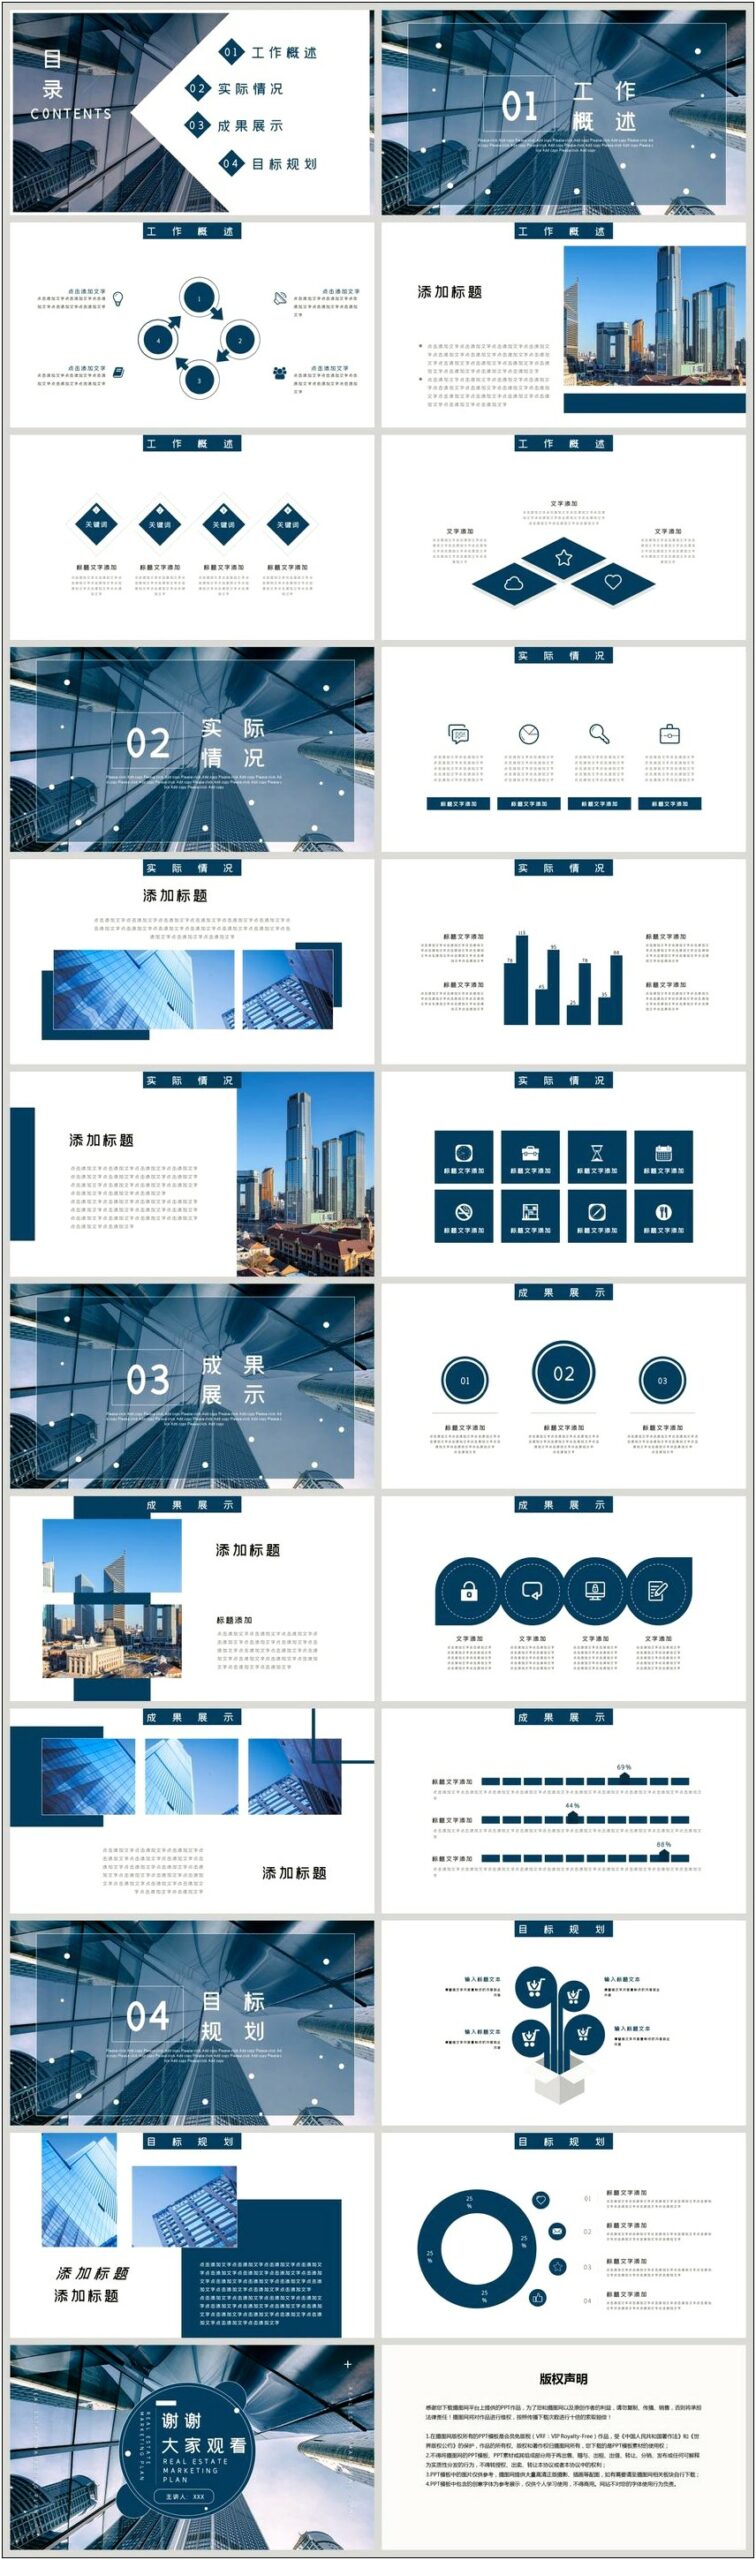 Free Download Template For Marketing Plan